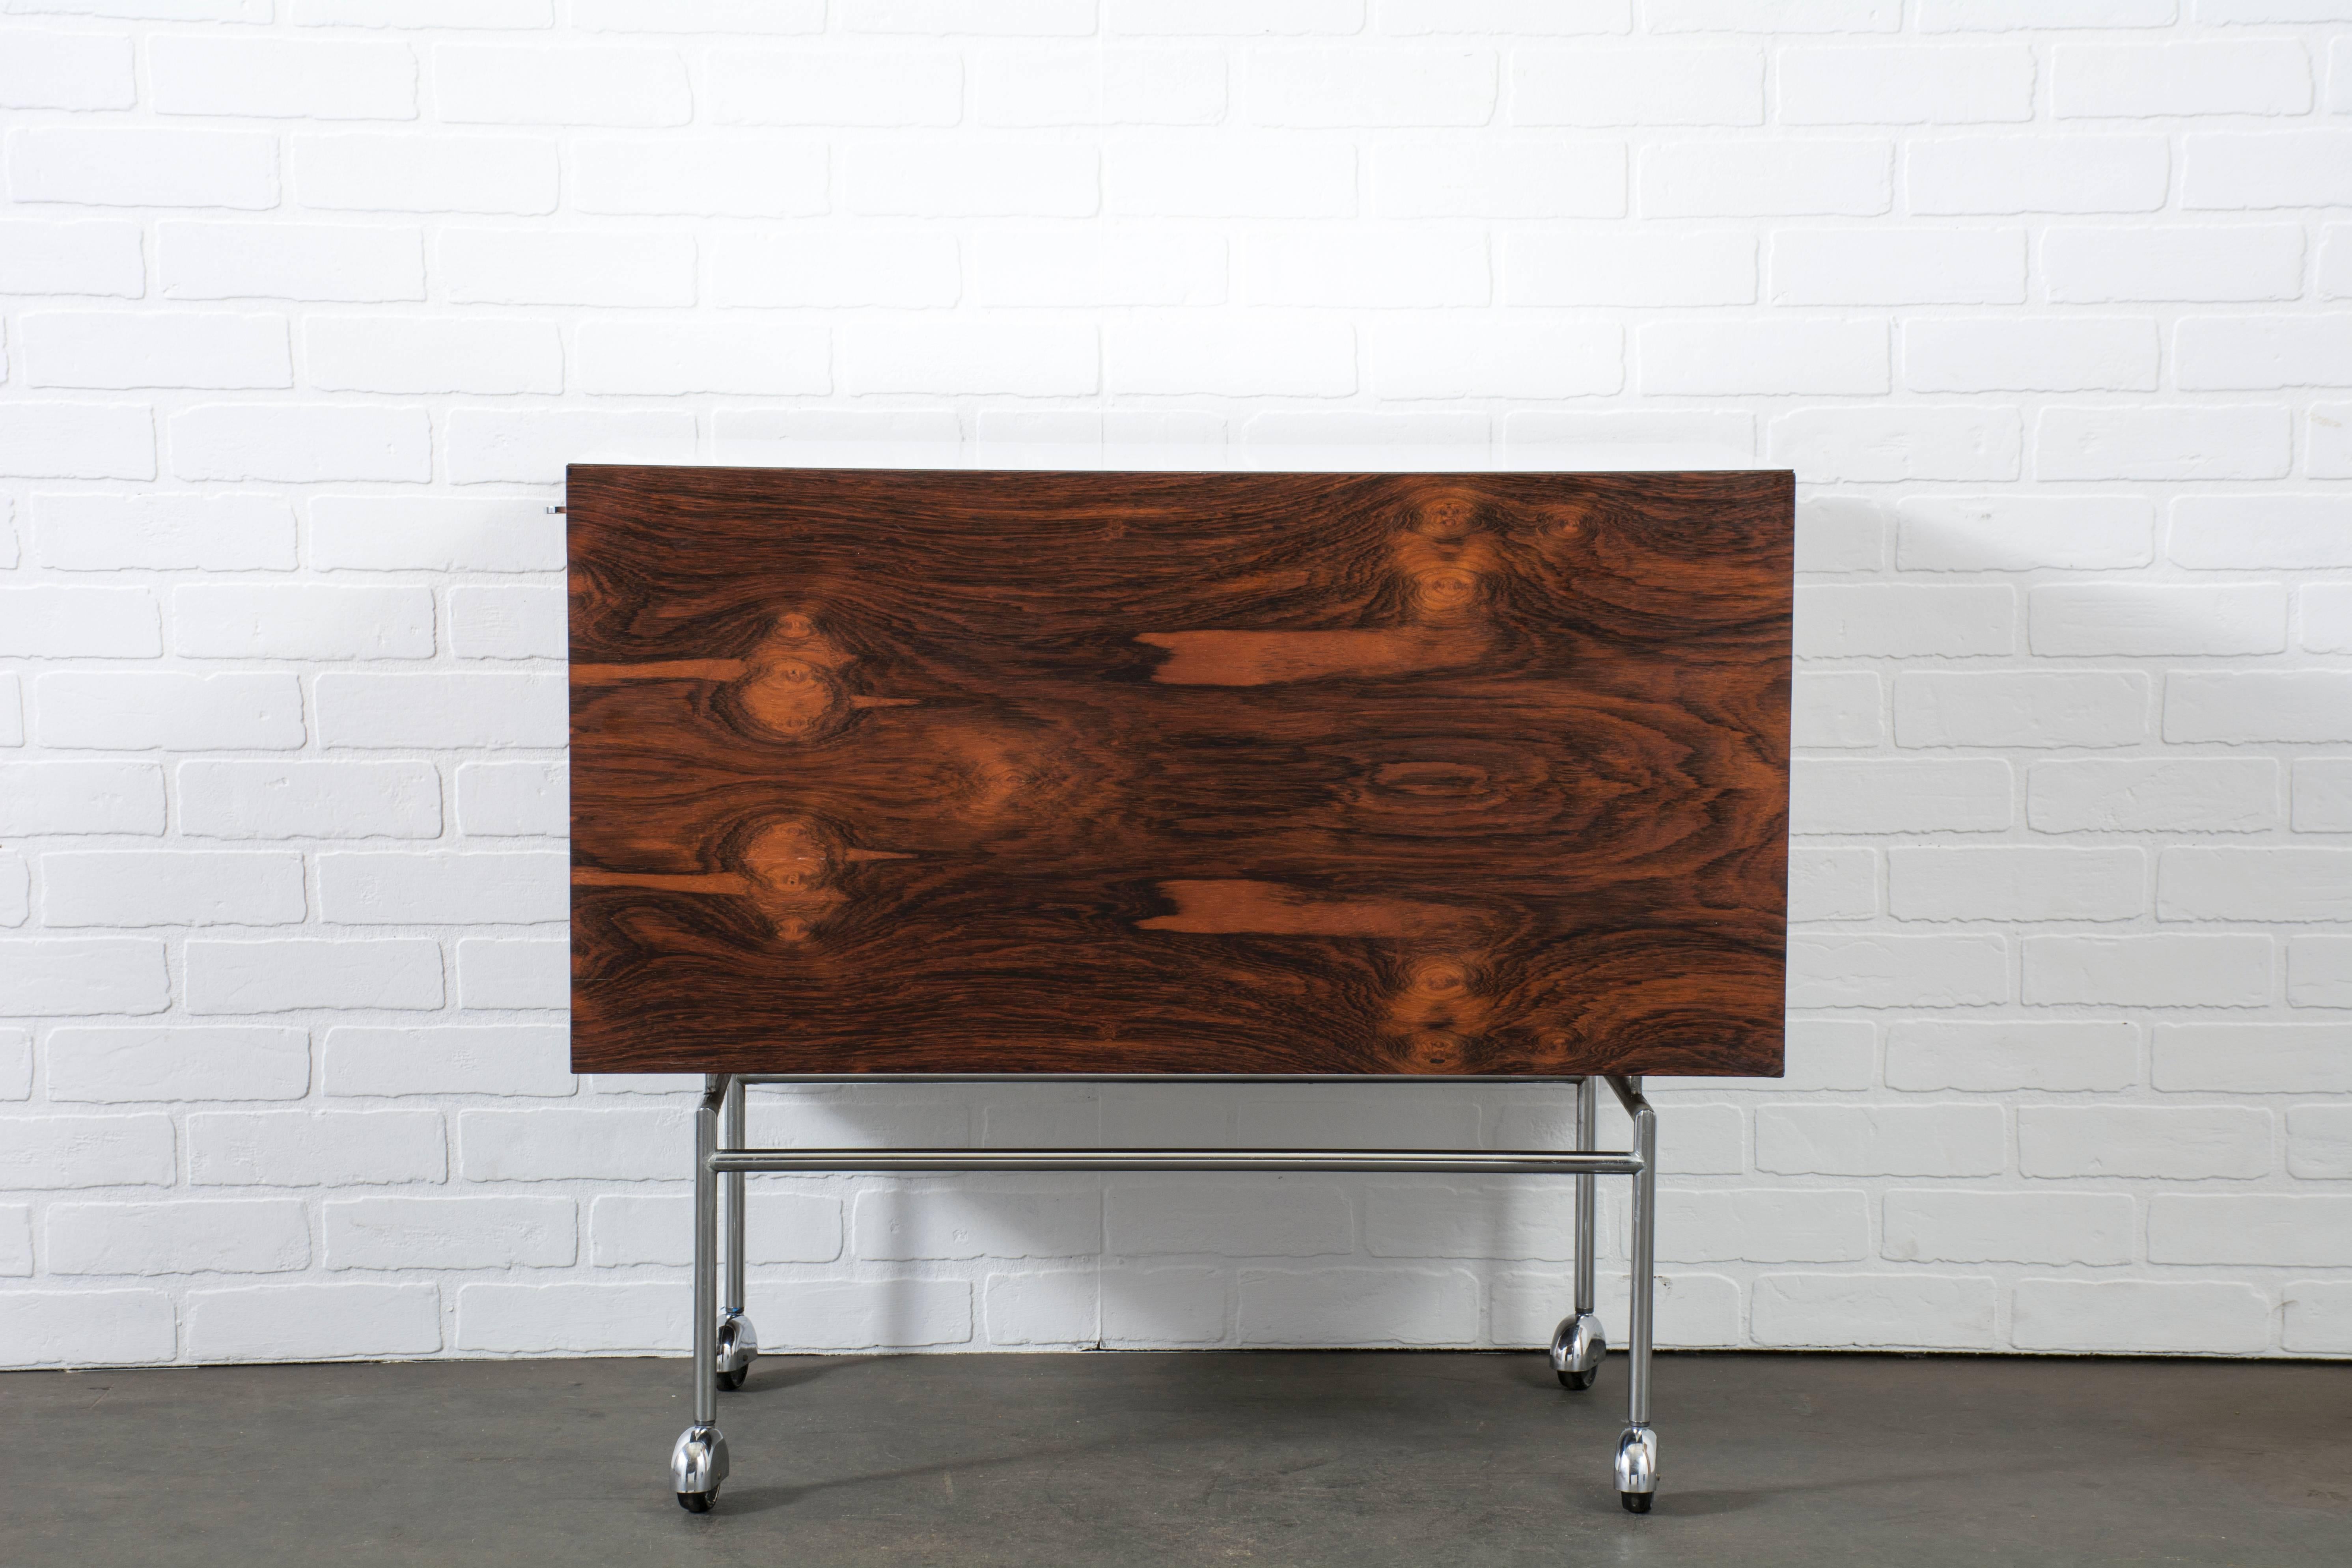 This vintage Mid-Century liquor cabinet was designed by Poul Nørreklit in the 1960s. It is Brazilian rosewood with a white laminate top that slides out to one side to reveal a large storage compartment (can hold 30+ bottles) and a removable rosewood